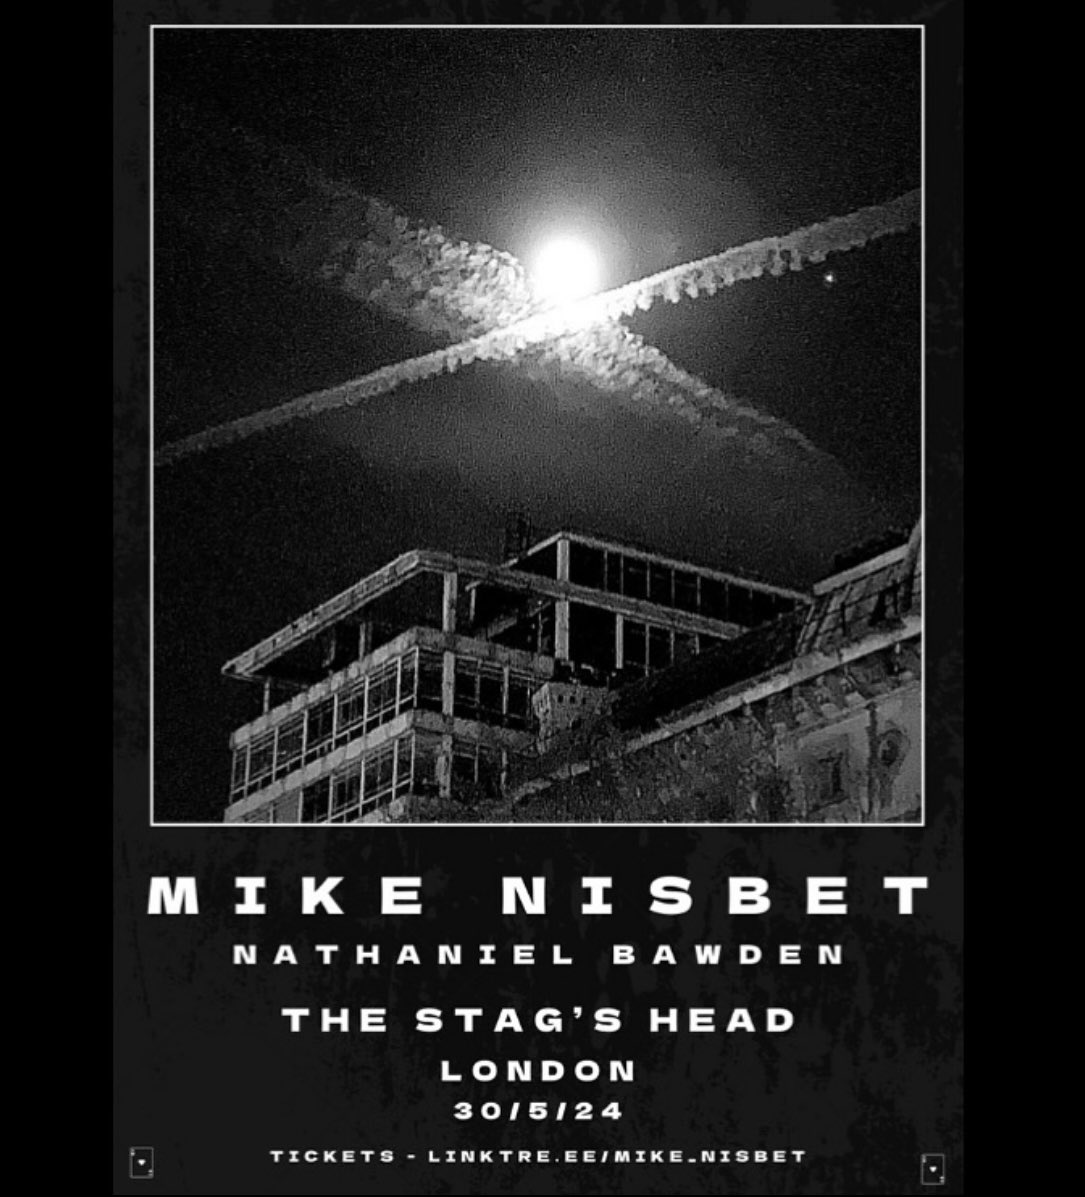 My next show is flying round, and it’s bound to be one of my best - supporting the superb @mike_nisbet on 30 May @thestagsheadhoxton_ 📯 be there‼️

linktr.ee/nathanielbawden

#London #Gig #Folk #SingerSongwriter